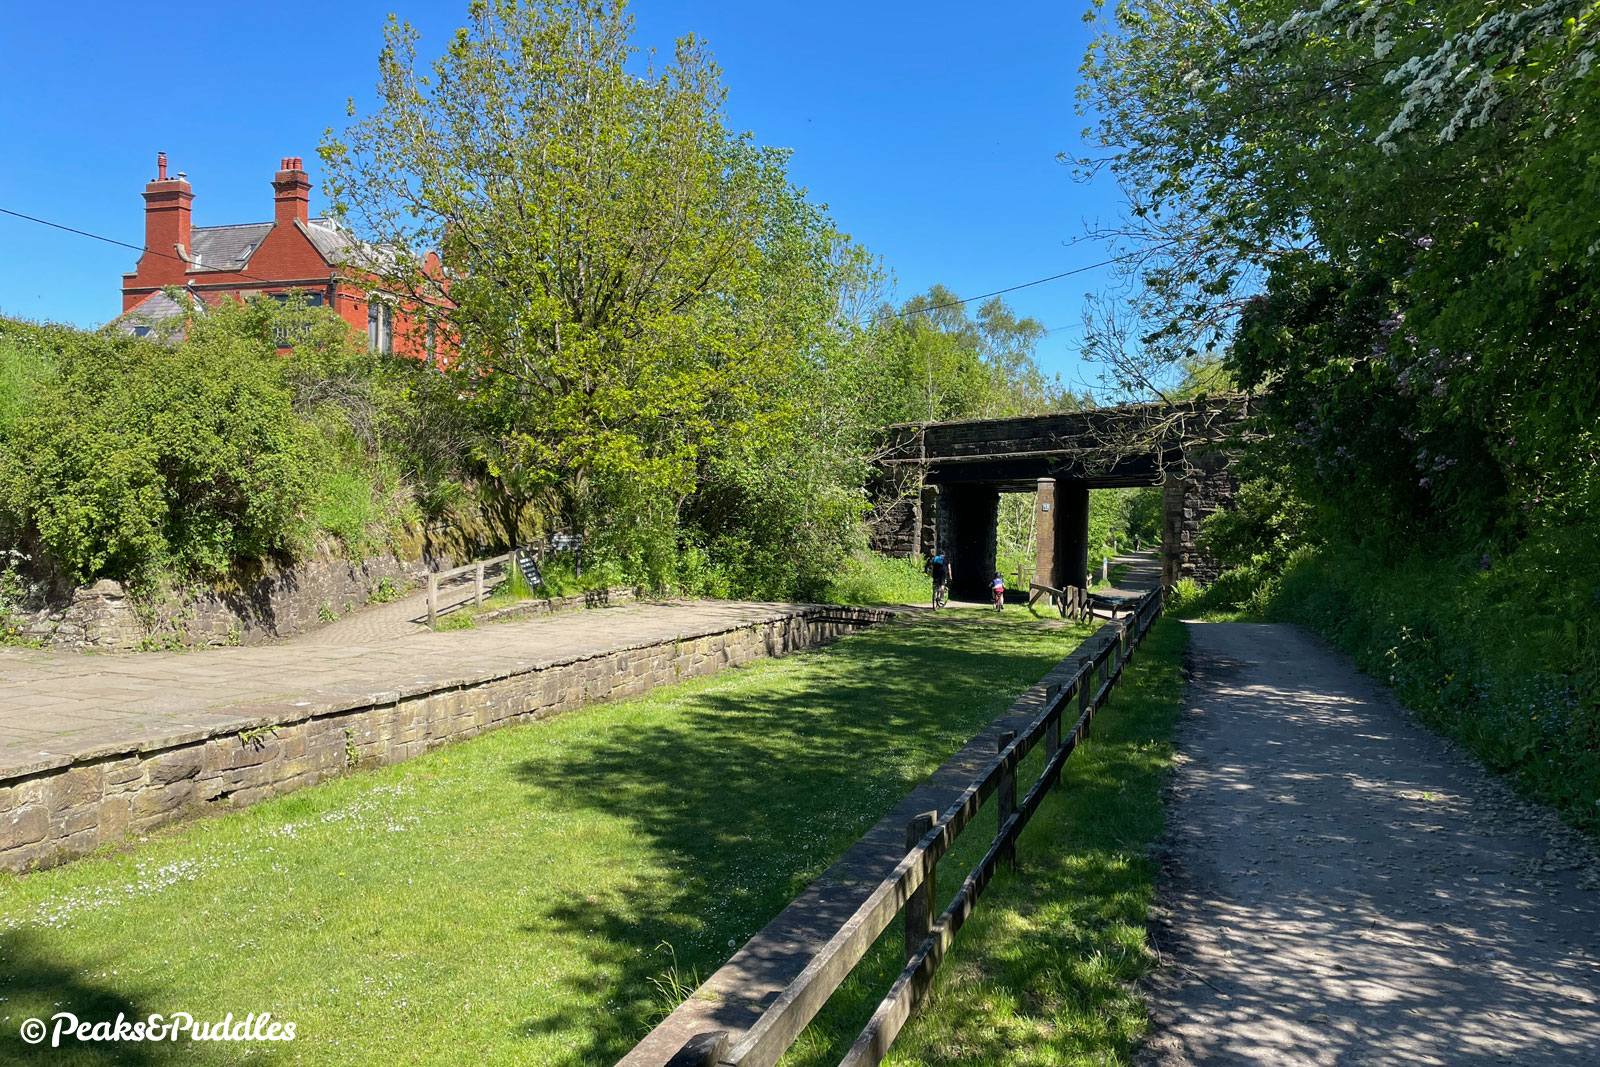 The former Higher Poynton station has a picnic spot between the old platforms and a cafe and pub up alongside the road above.